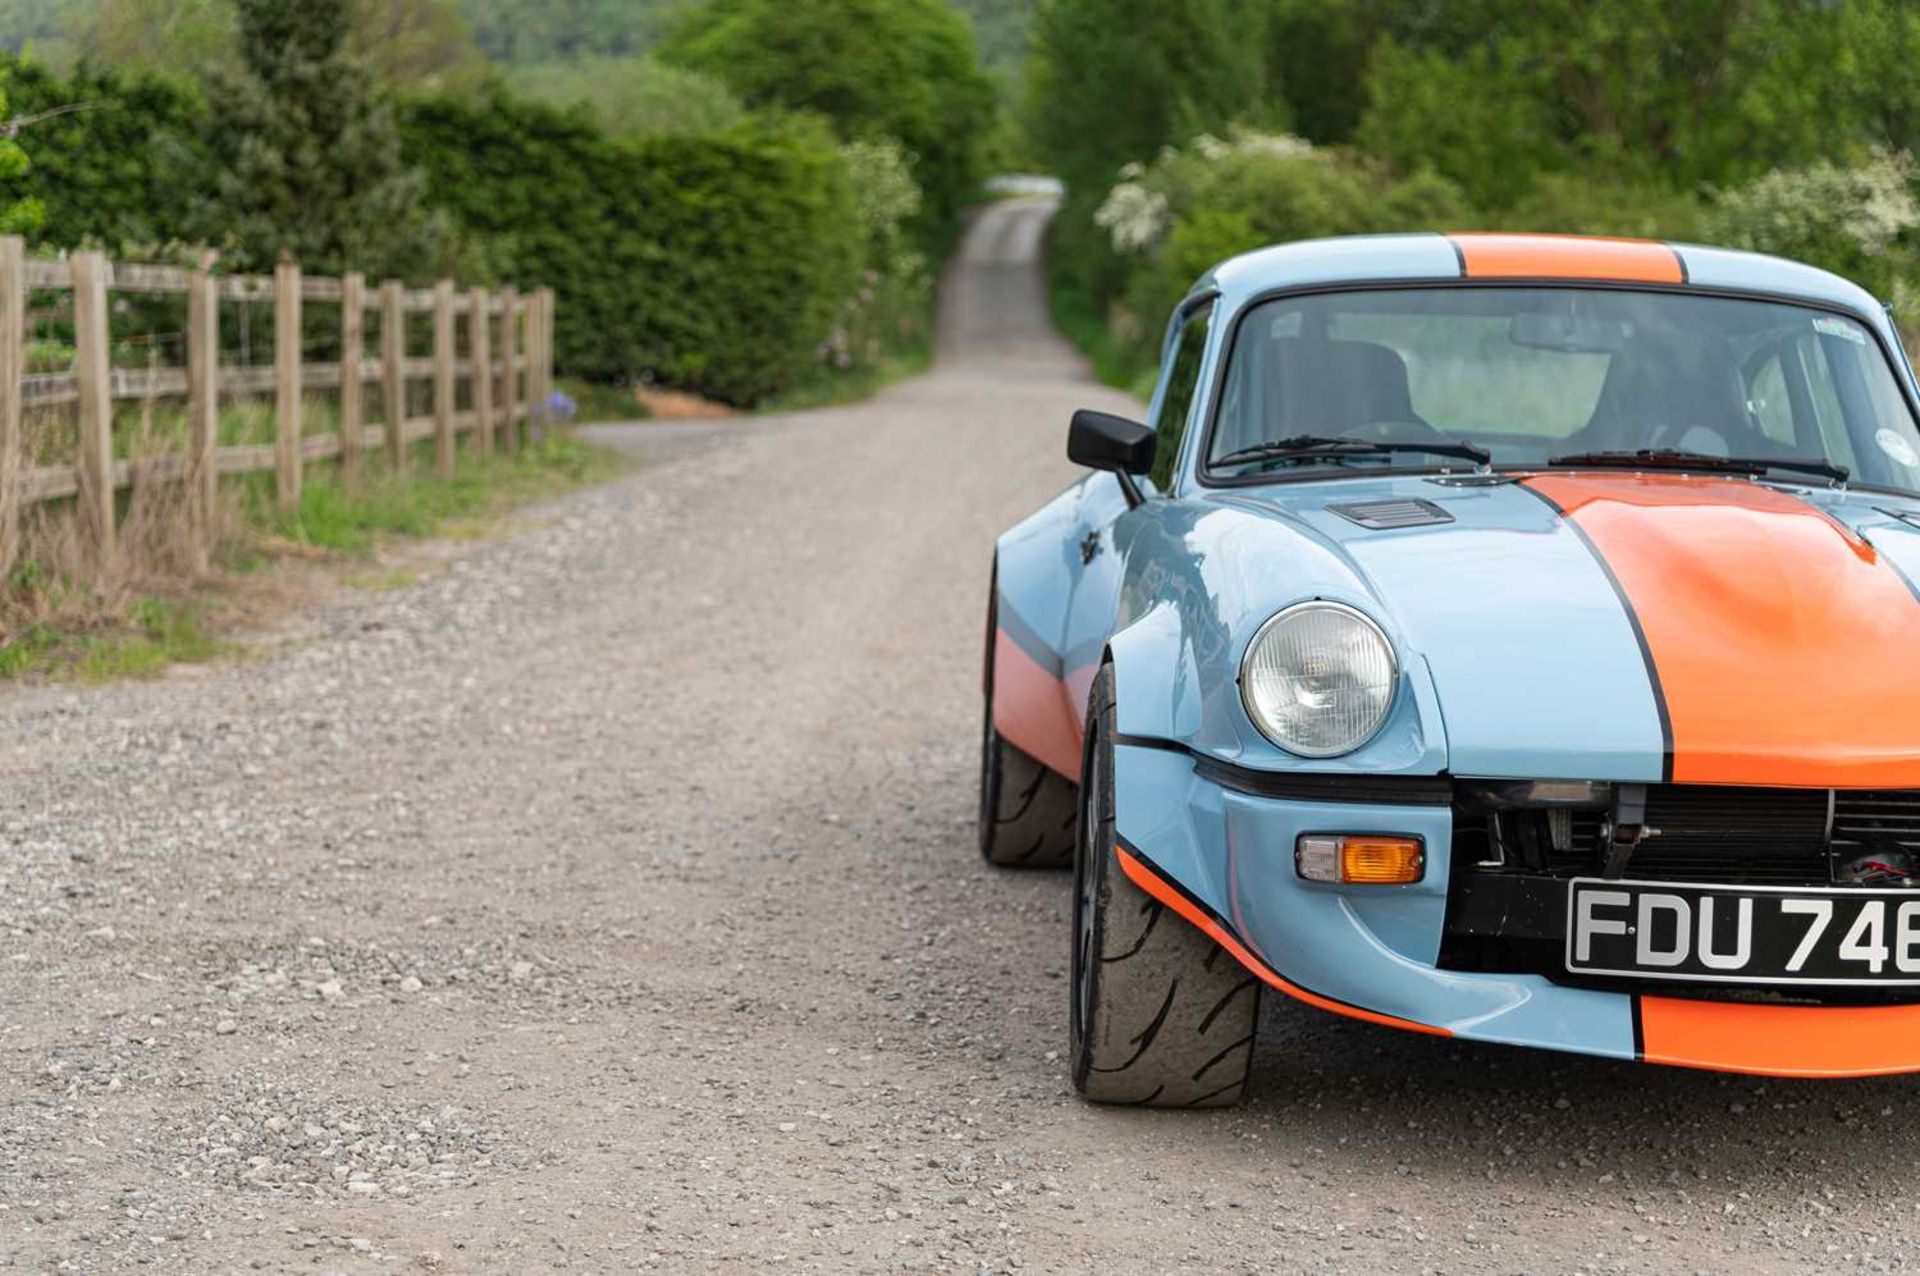 1973 Triumph GT6  ***NO RESERVE*** Presented in Gulf Racing-inspired paintwork, road-going track wea - Bild 3 aus 65